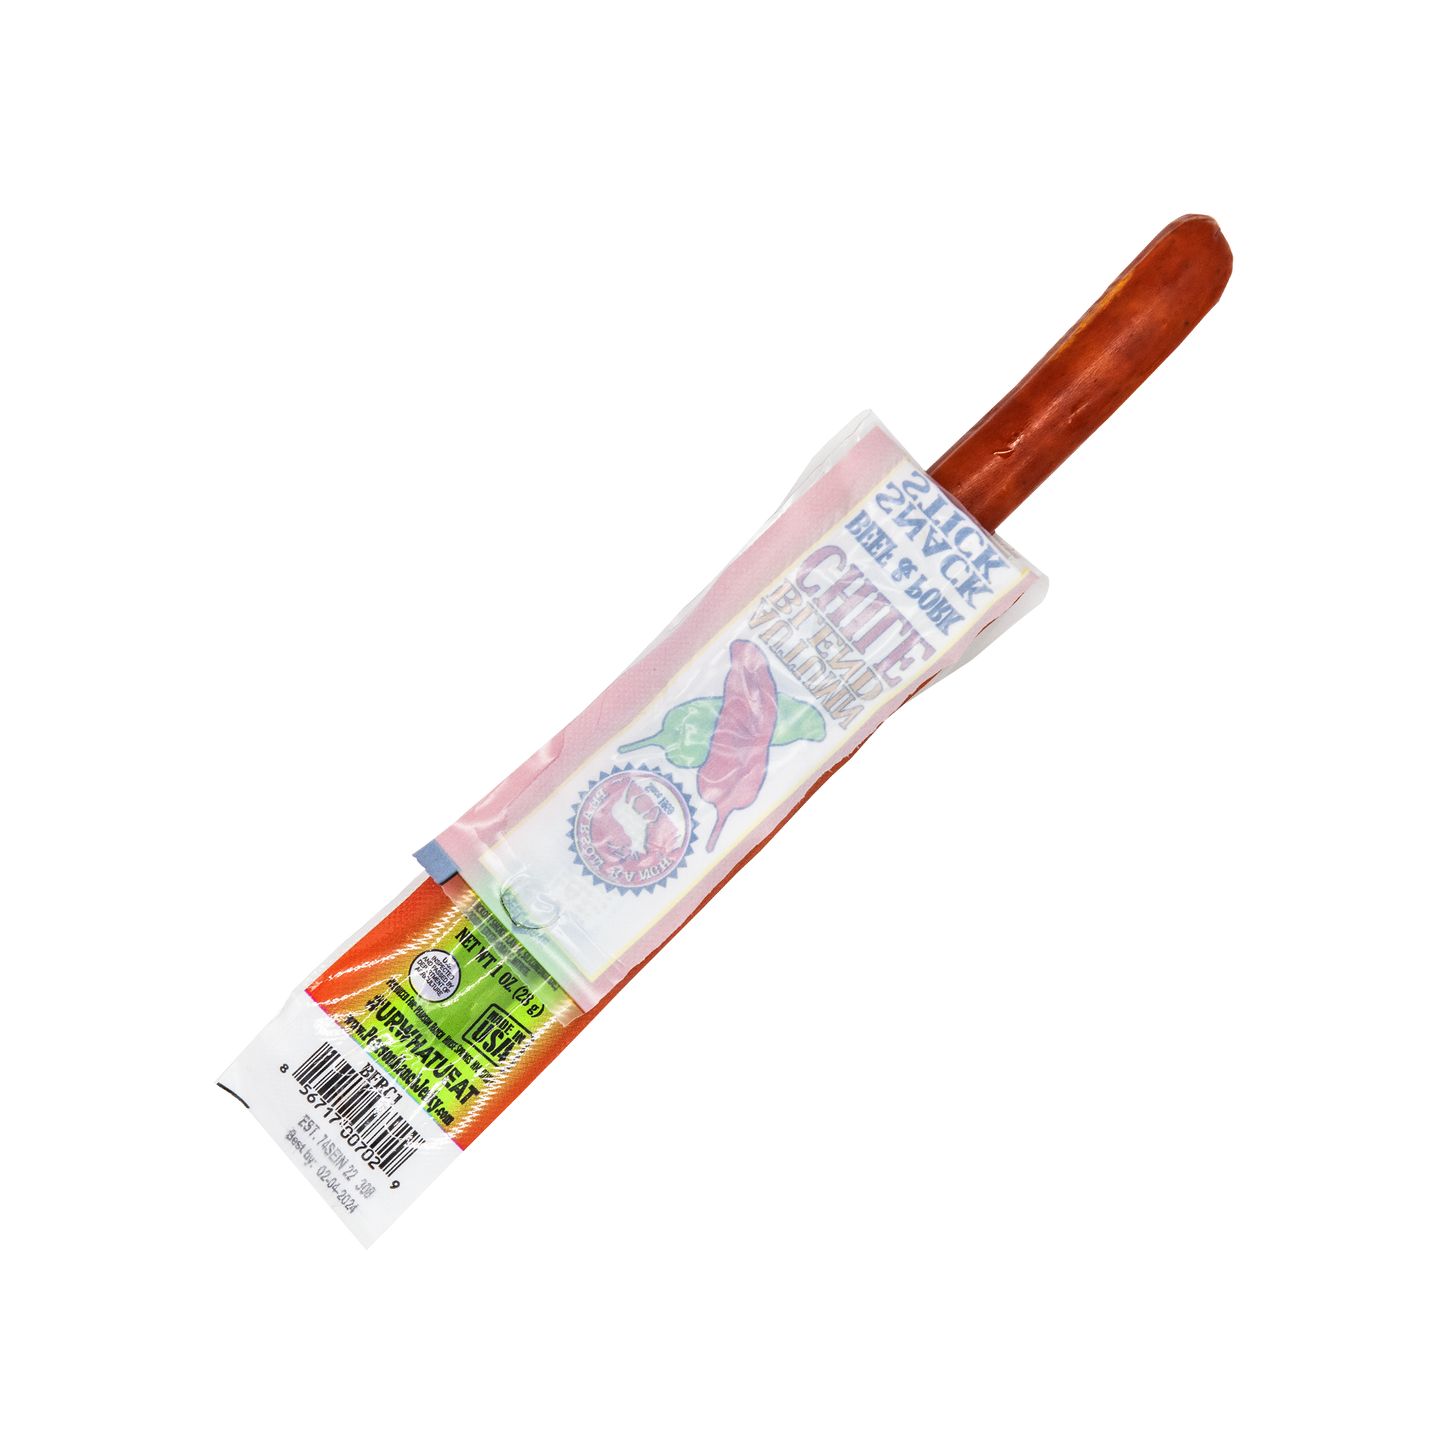 Autumn Blend Chile Beef Stick made with New Mexico Red Chile. The perfect meat snack that is high in protein, low carb, natural, and zero sugar.